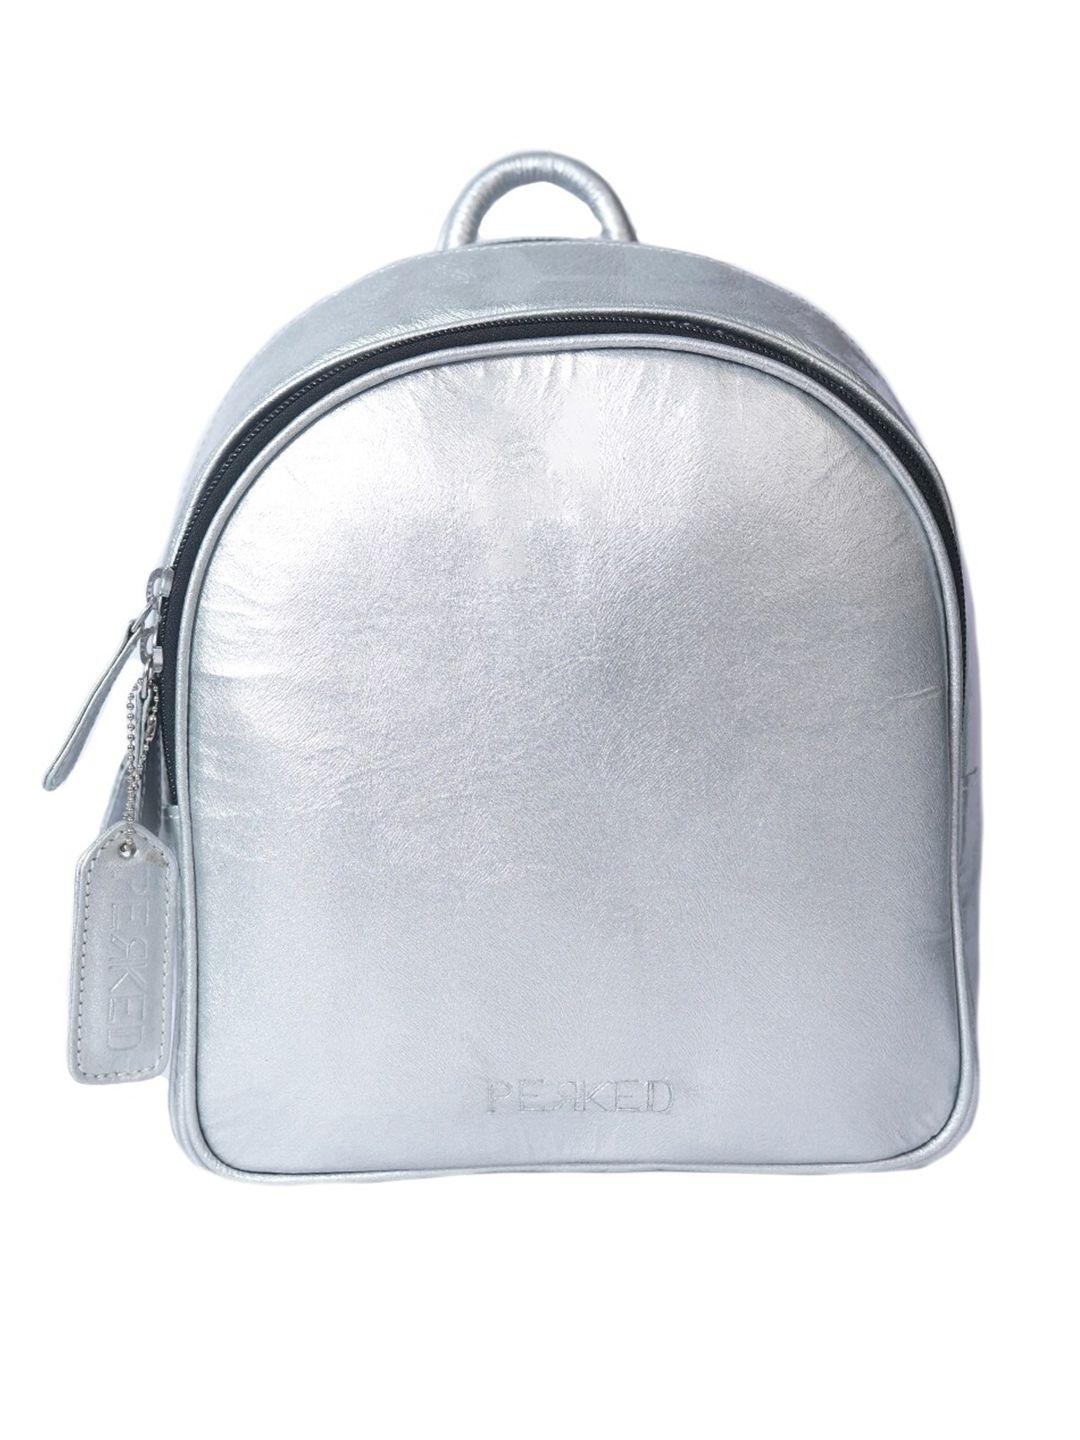 perked women silver-toned leather backpack